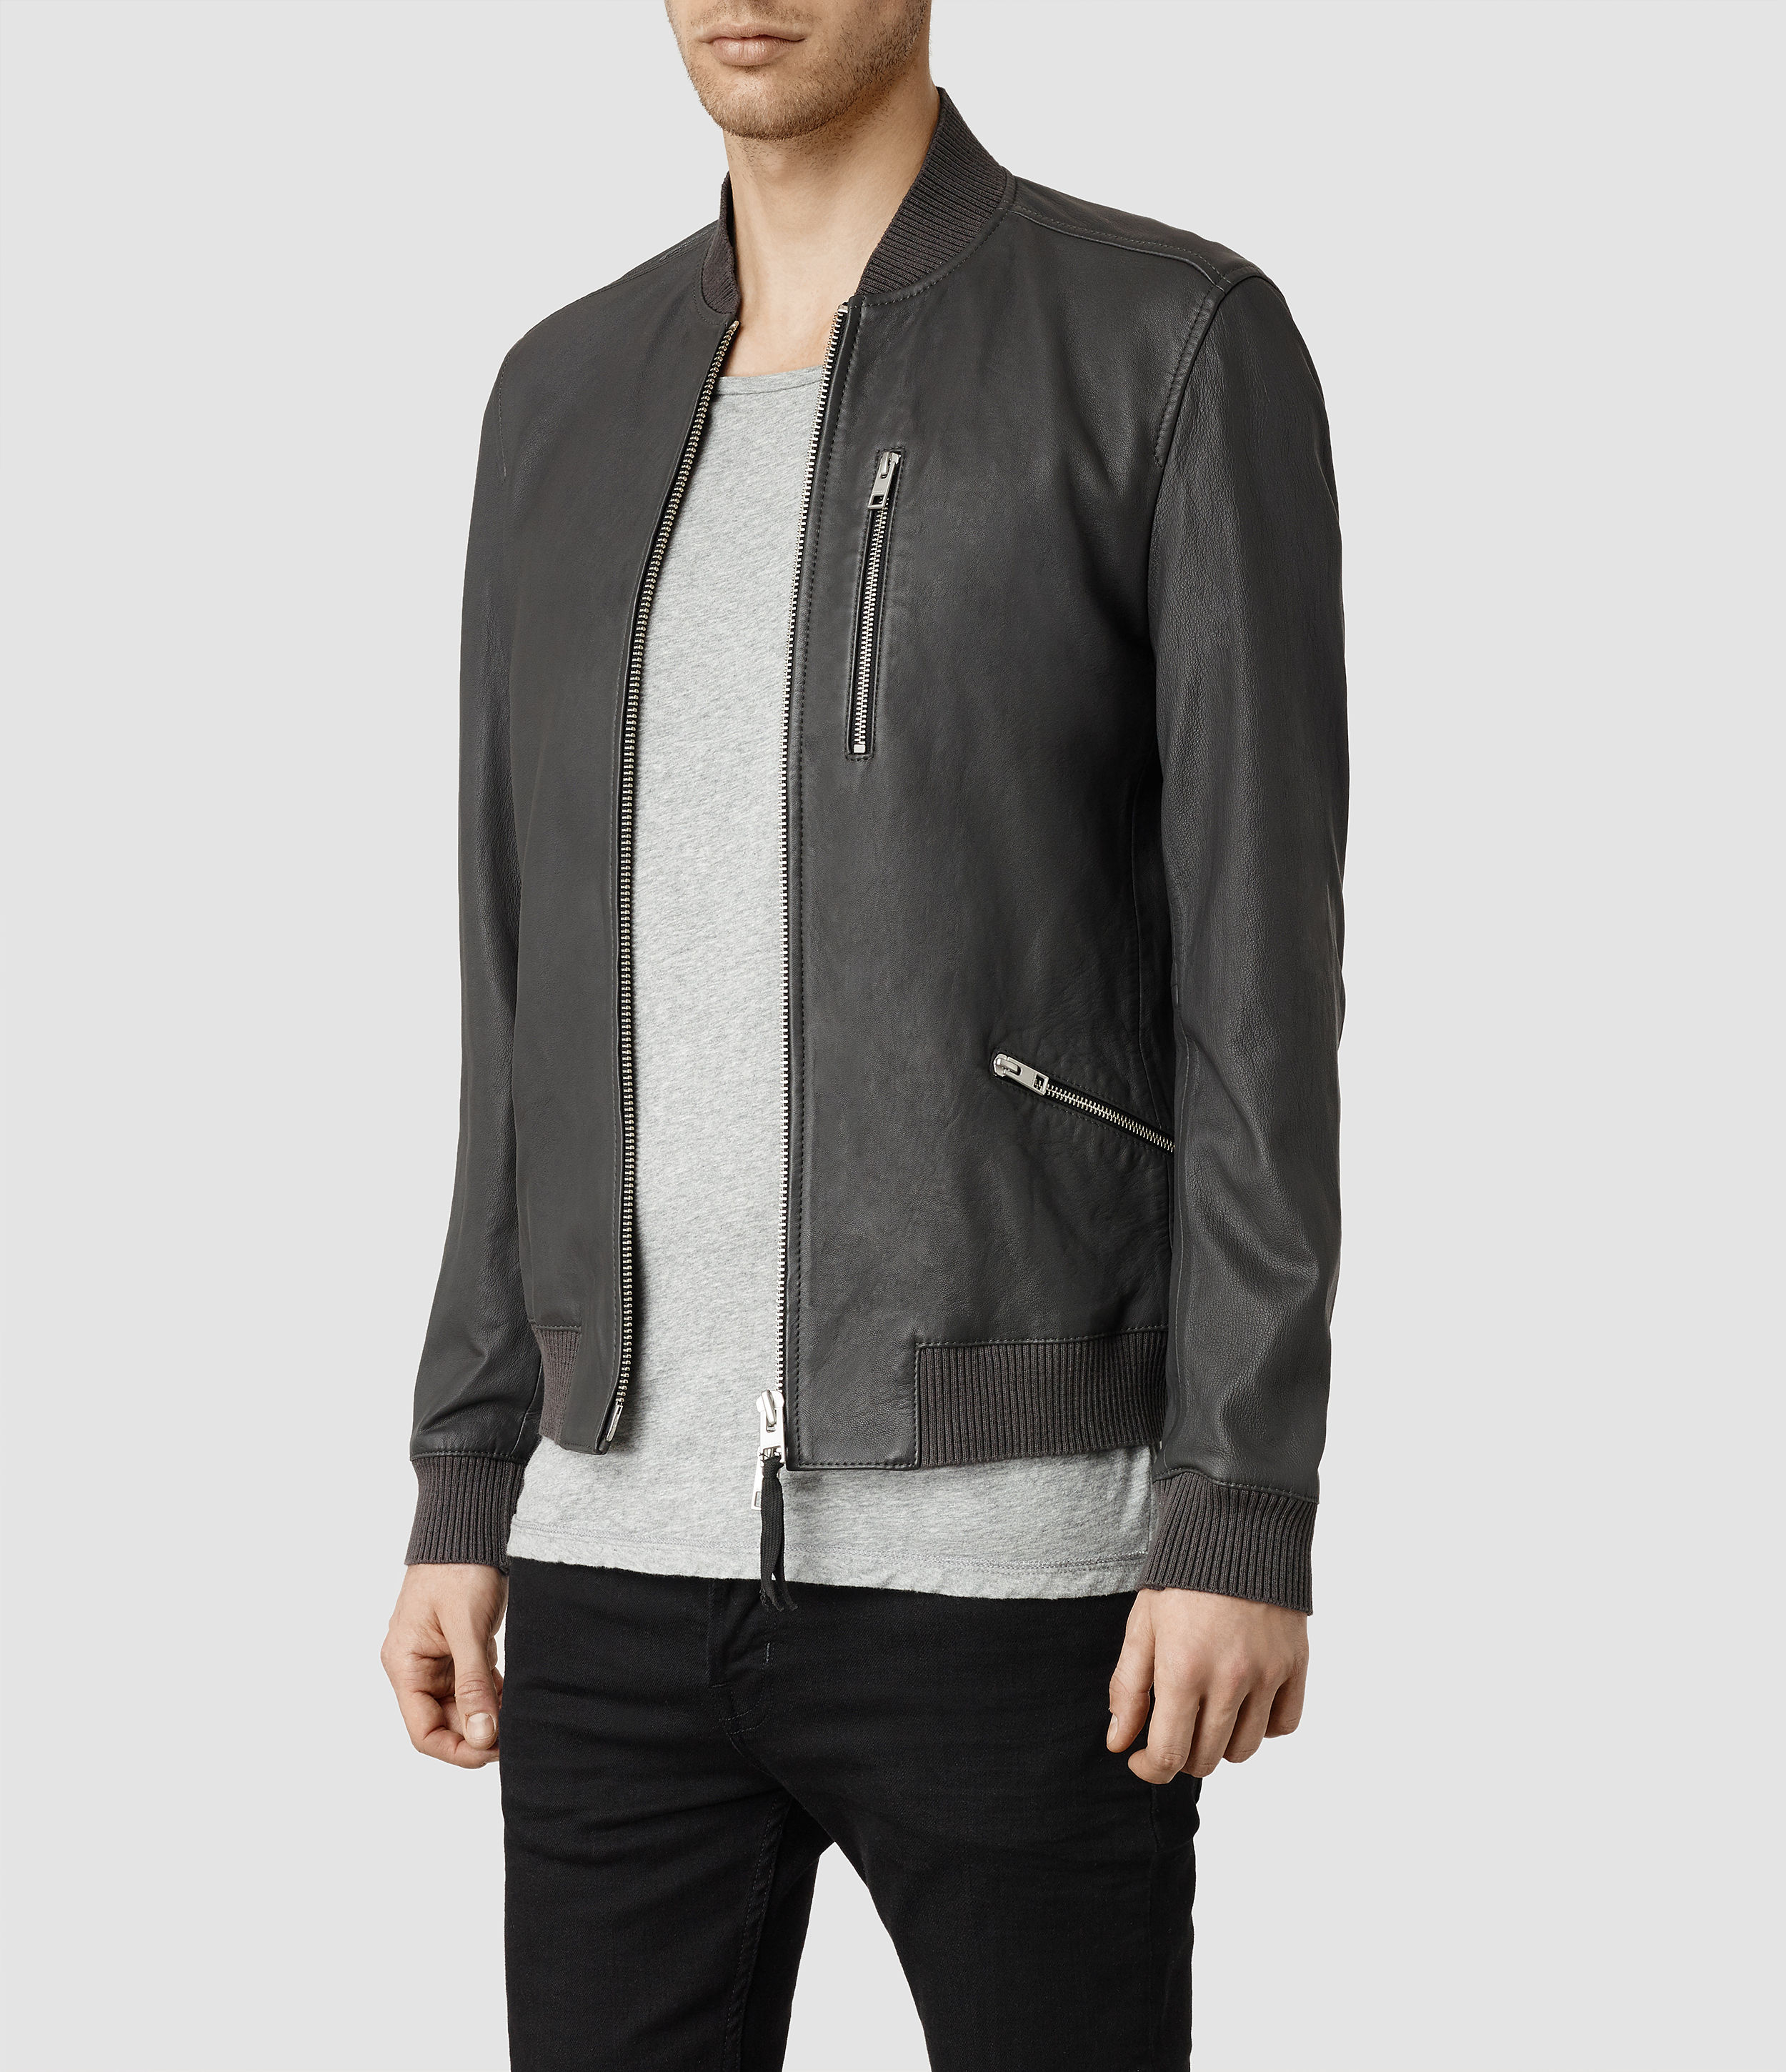 Lyst - Allsaints Utility Leather Bomber Jacket in Gray for Men